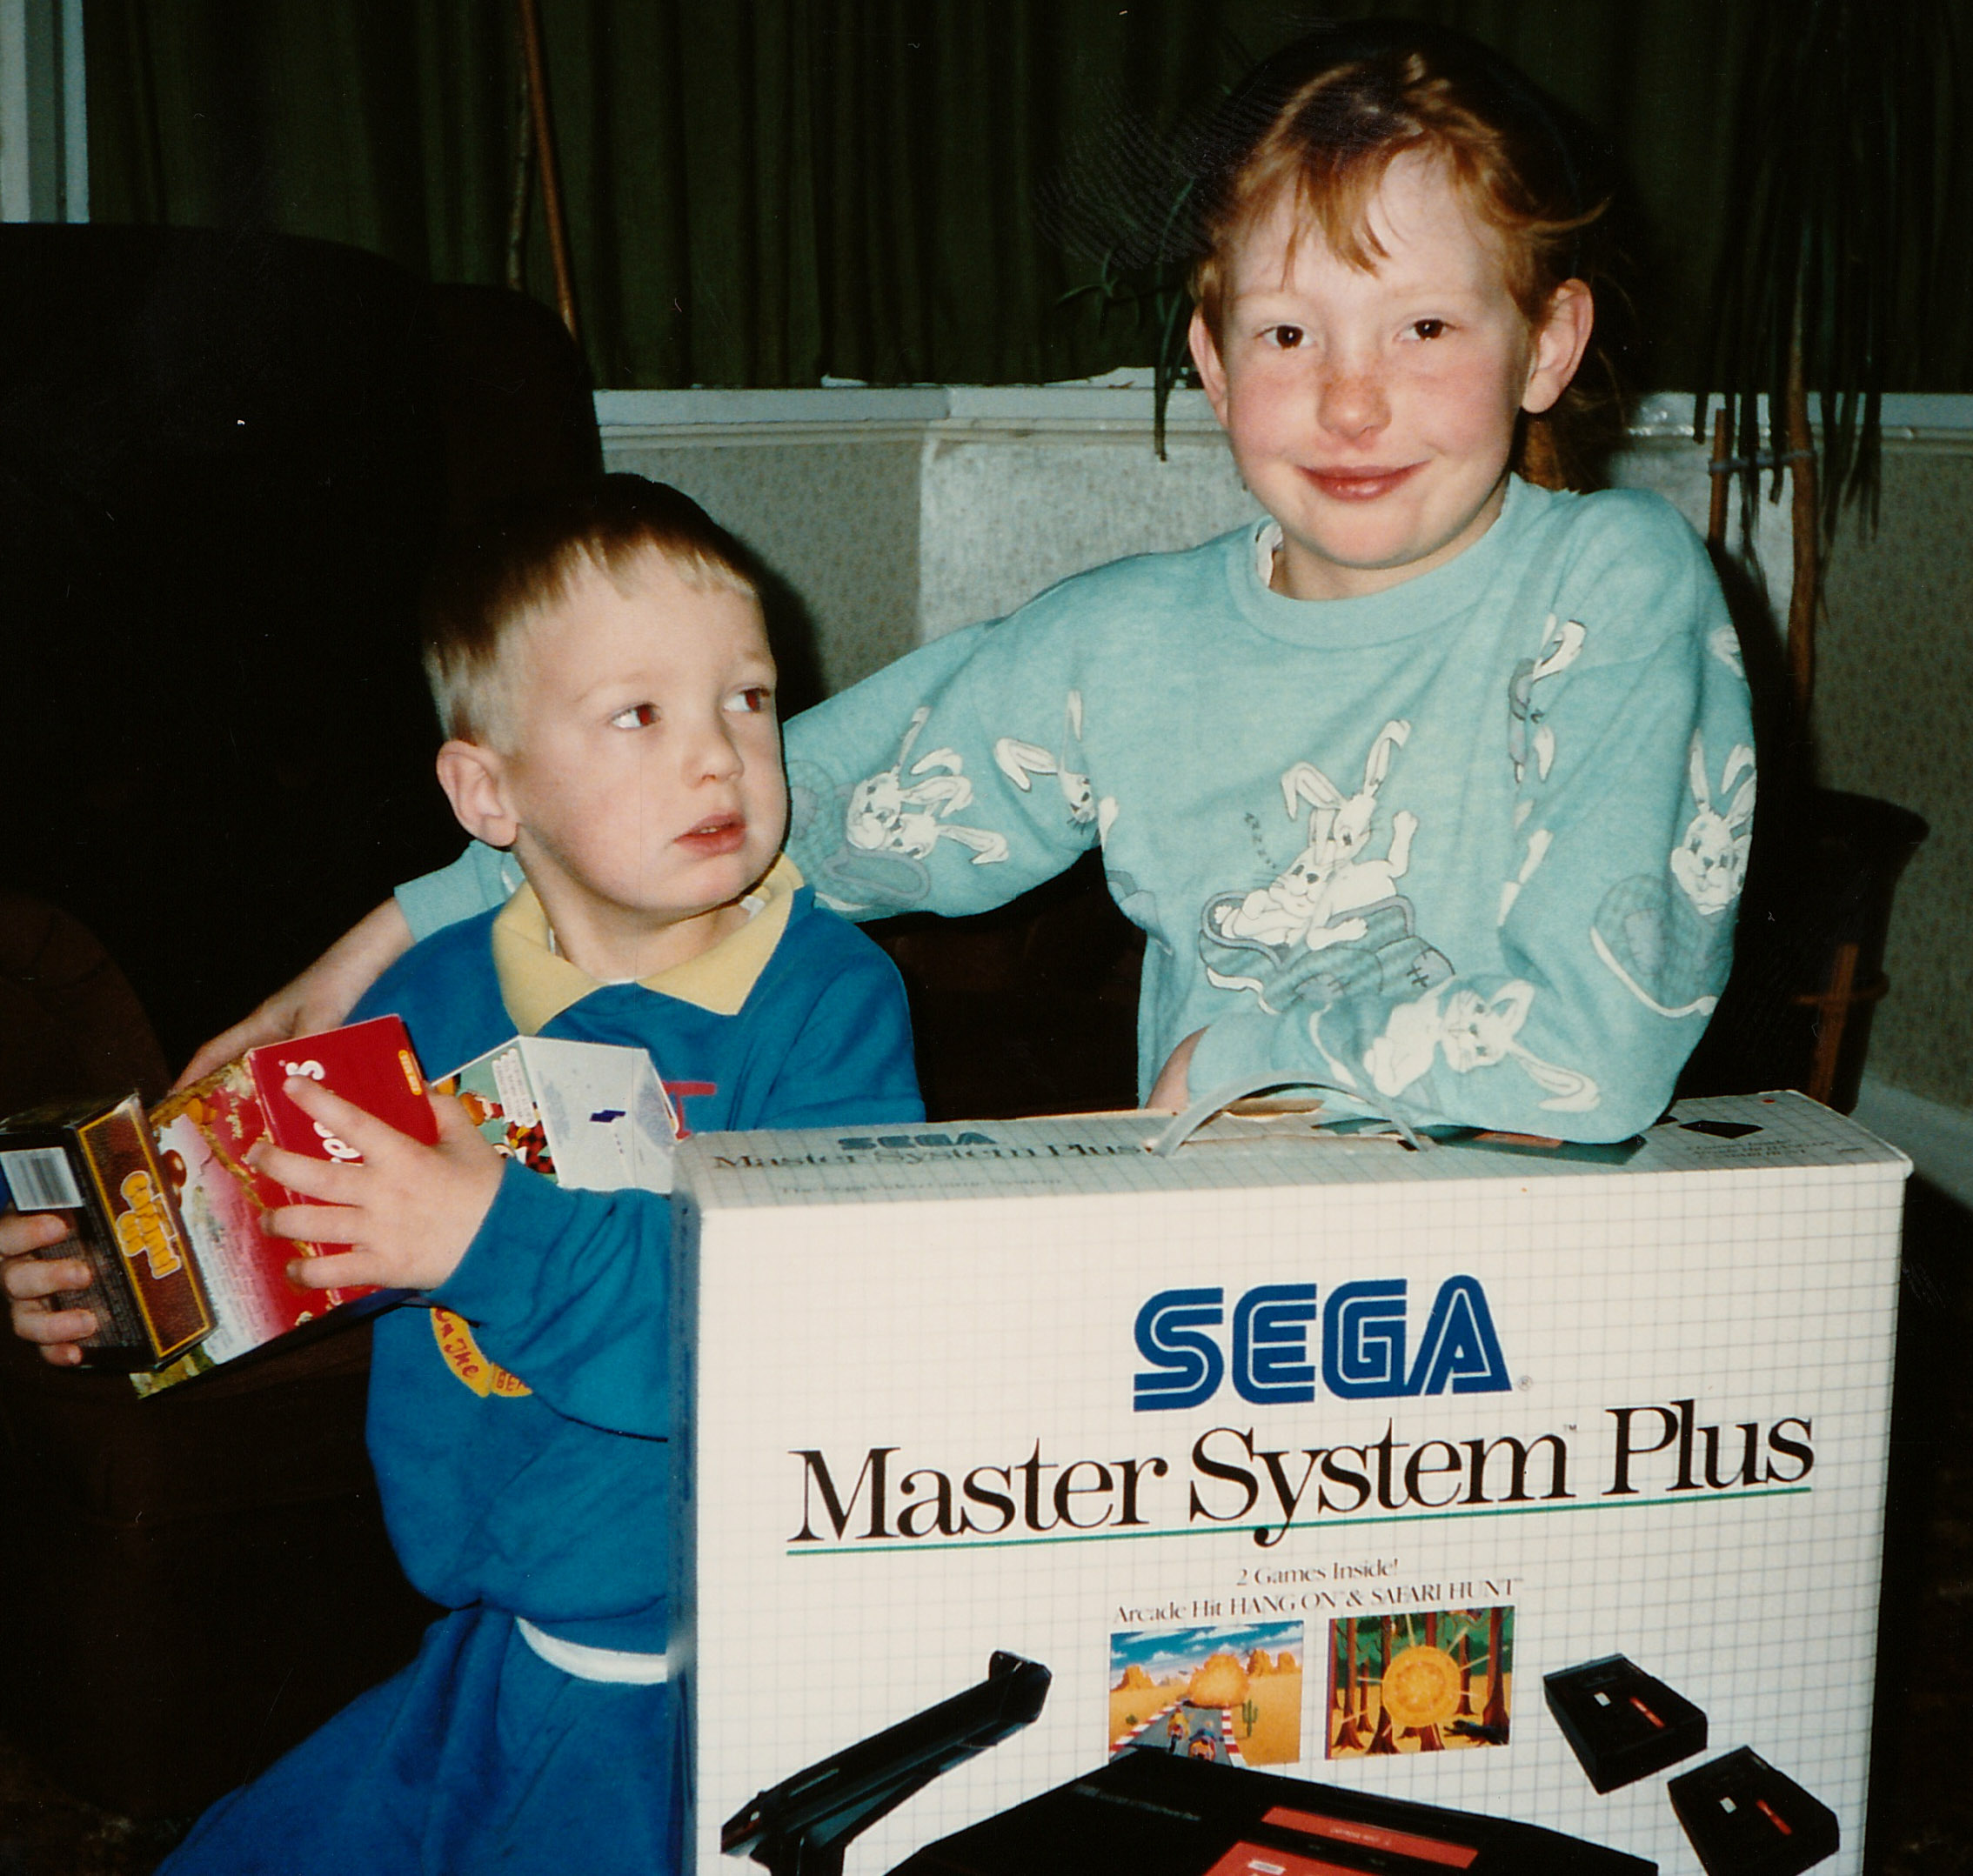 1991 03 31 Paul and Corryn with easter eggs and sega master system plus